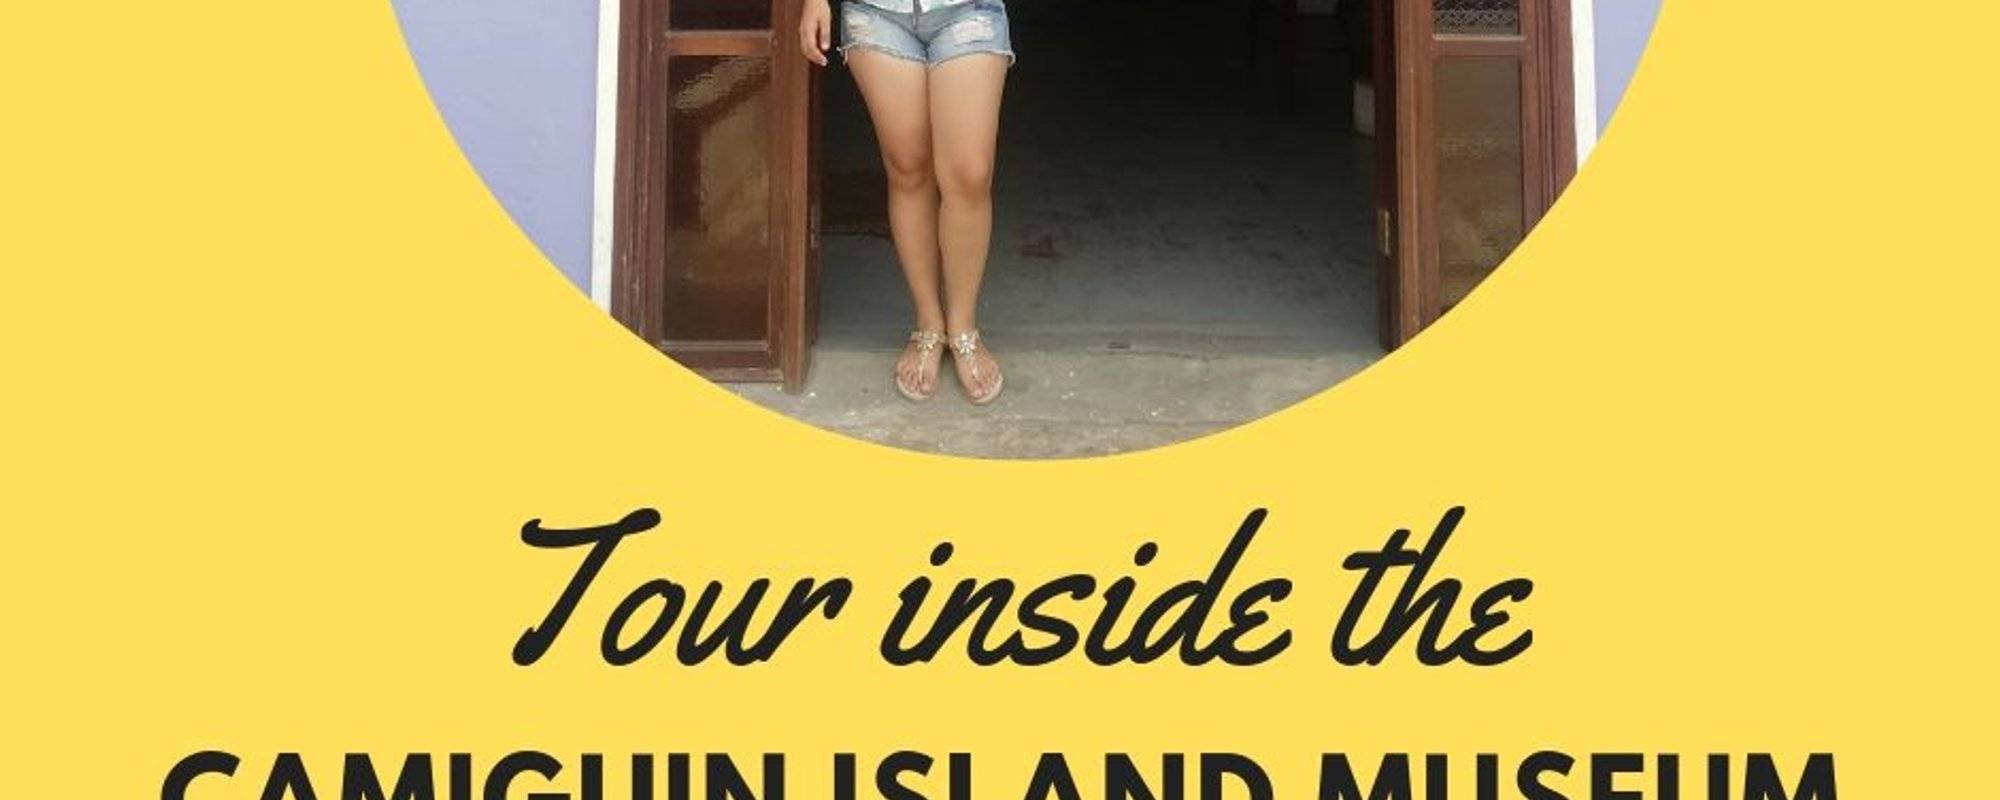 Gail Travels to Camiguin Island Featuring the Camiguin Island Museum